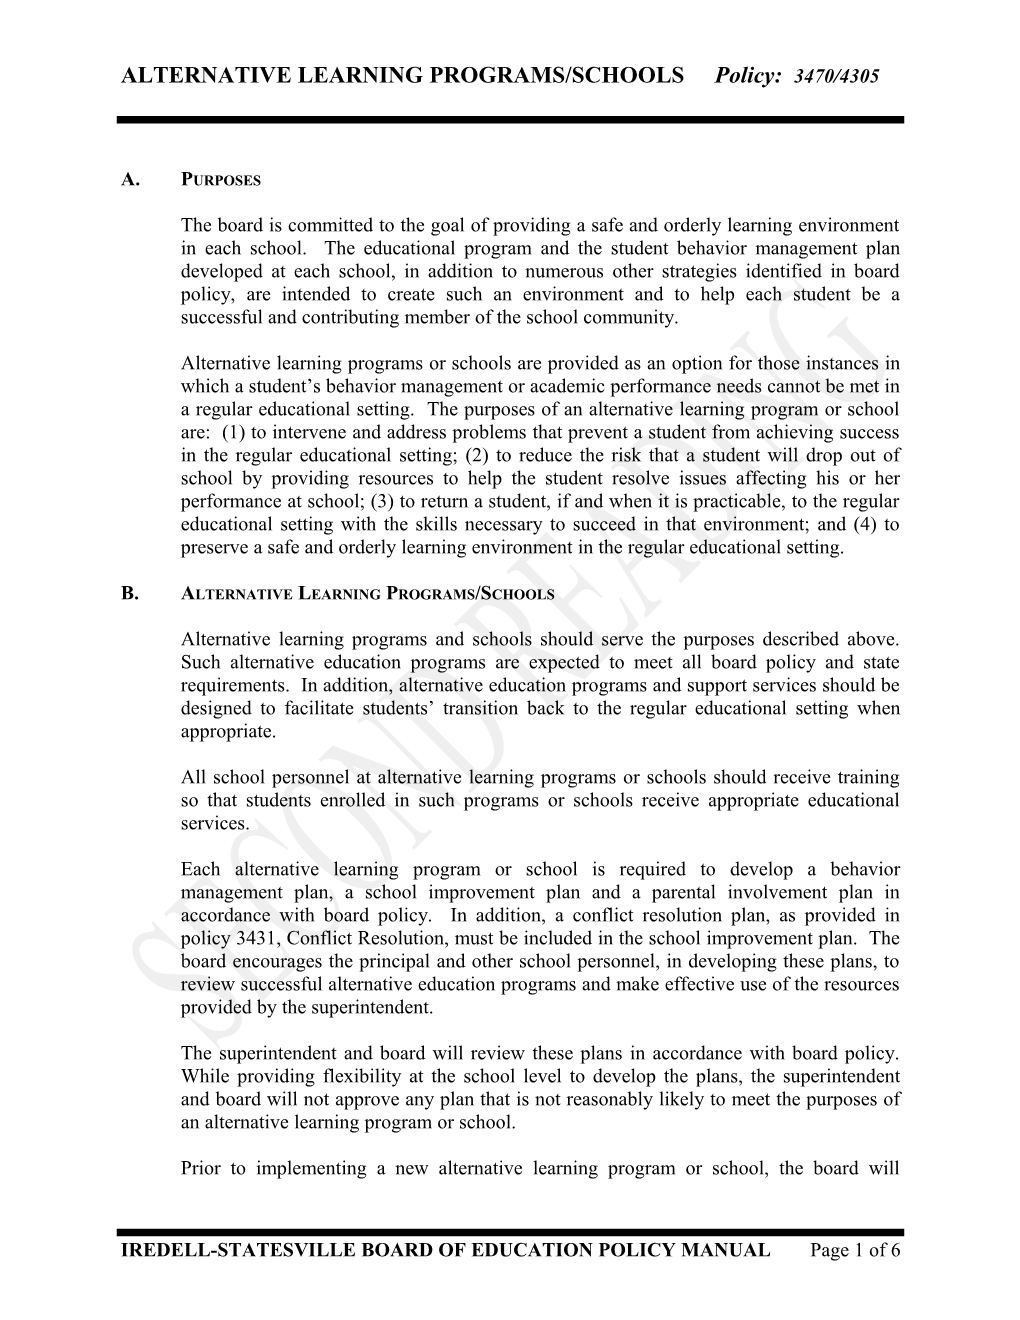 IREDELL-STATESVILLE BOARD of EDUCATION POLICY MANUAL Page 1 of 6